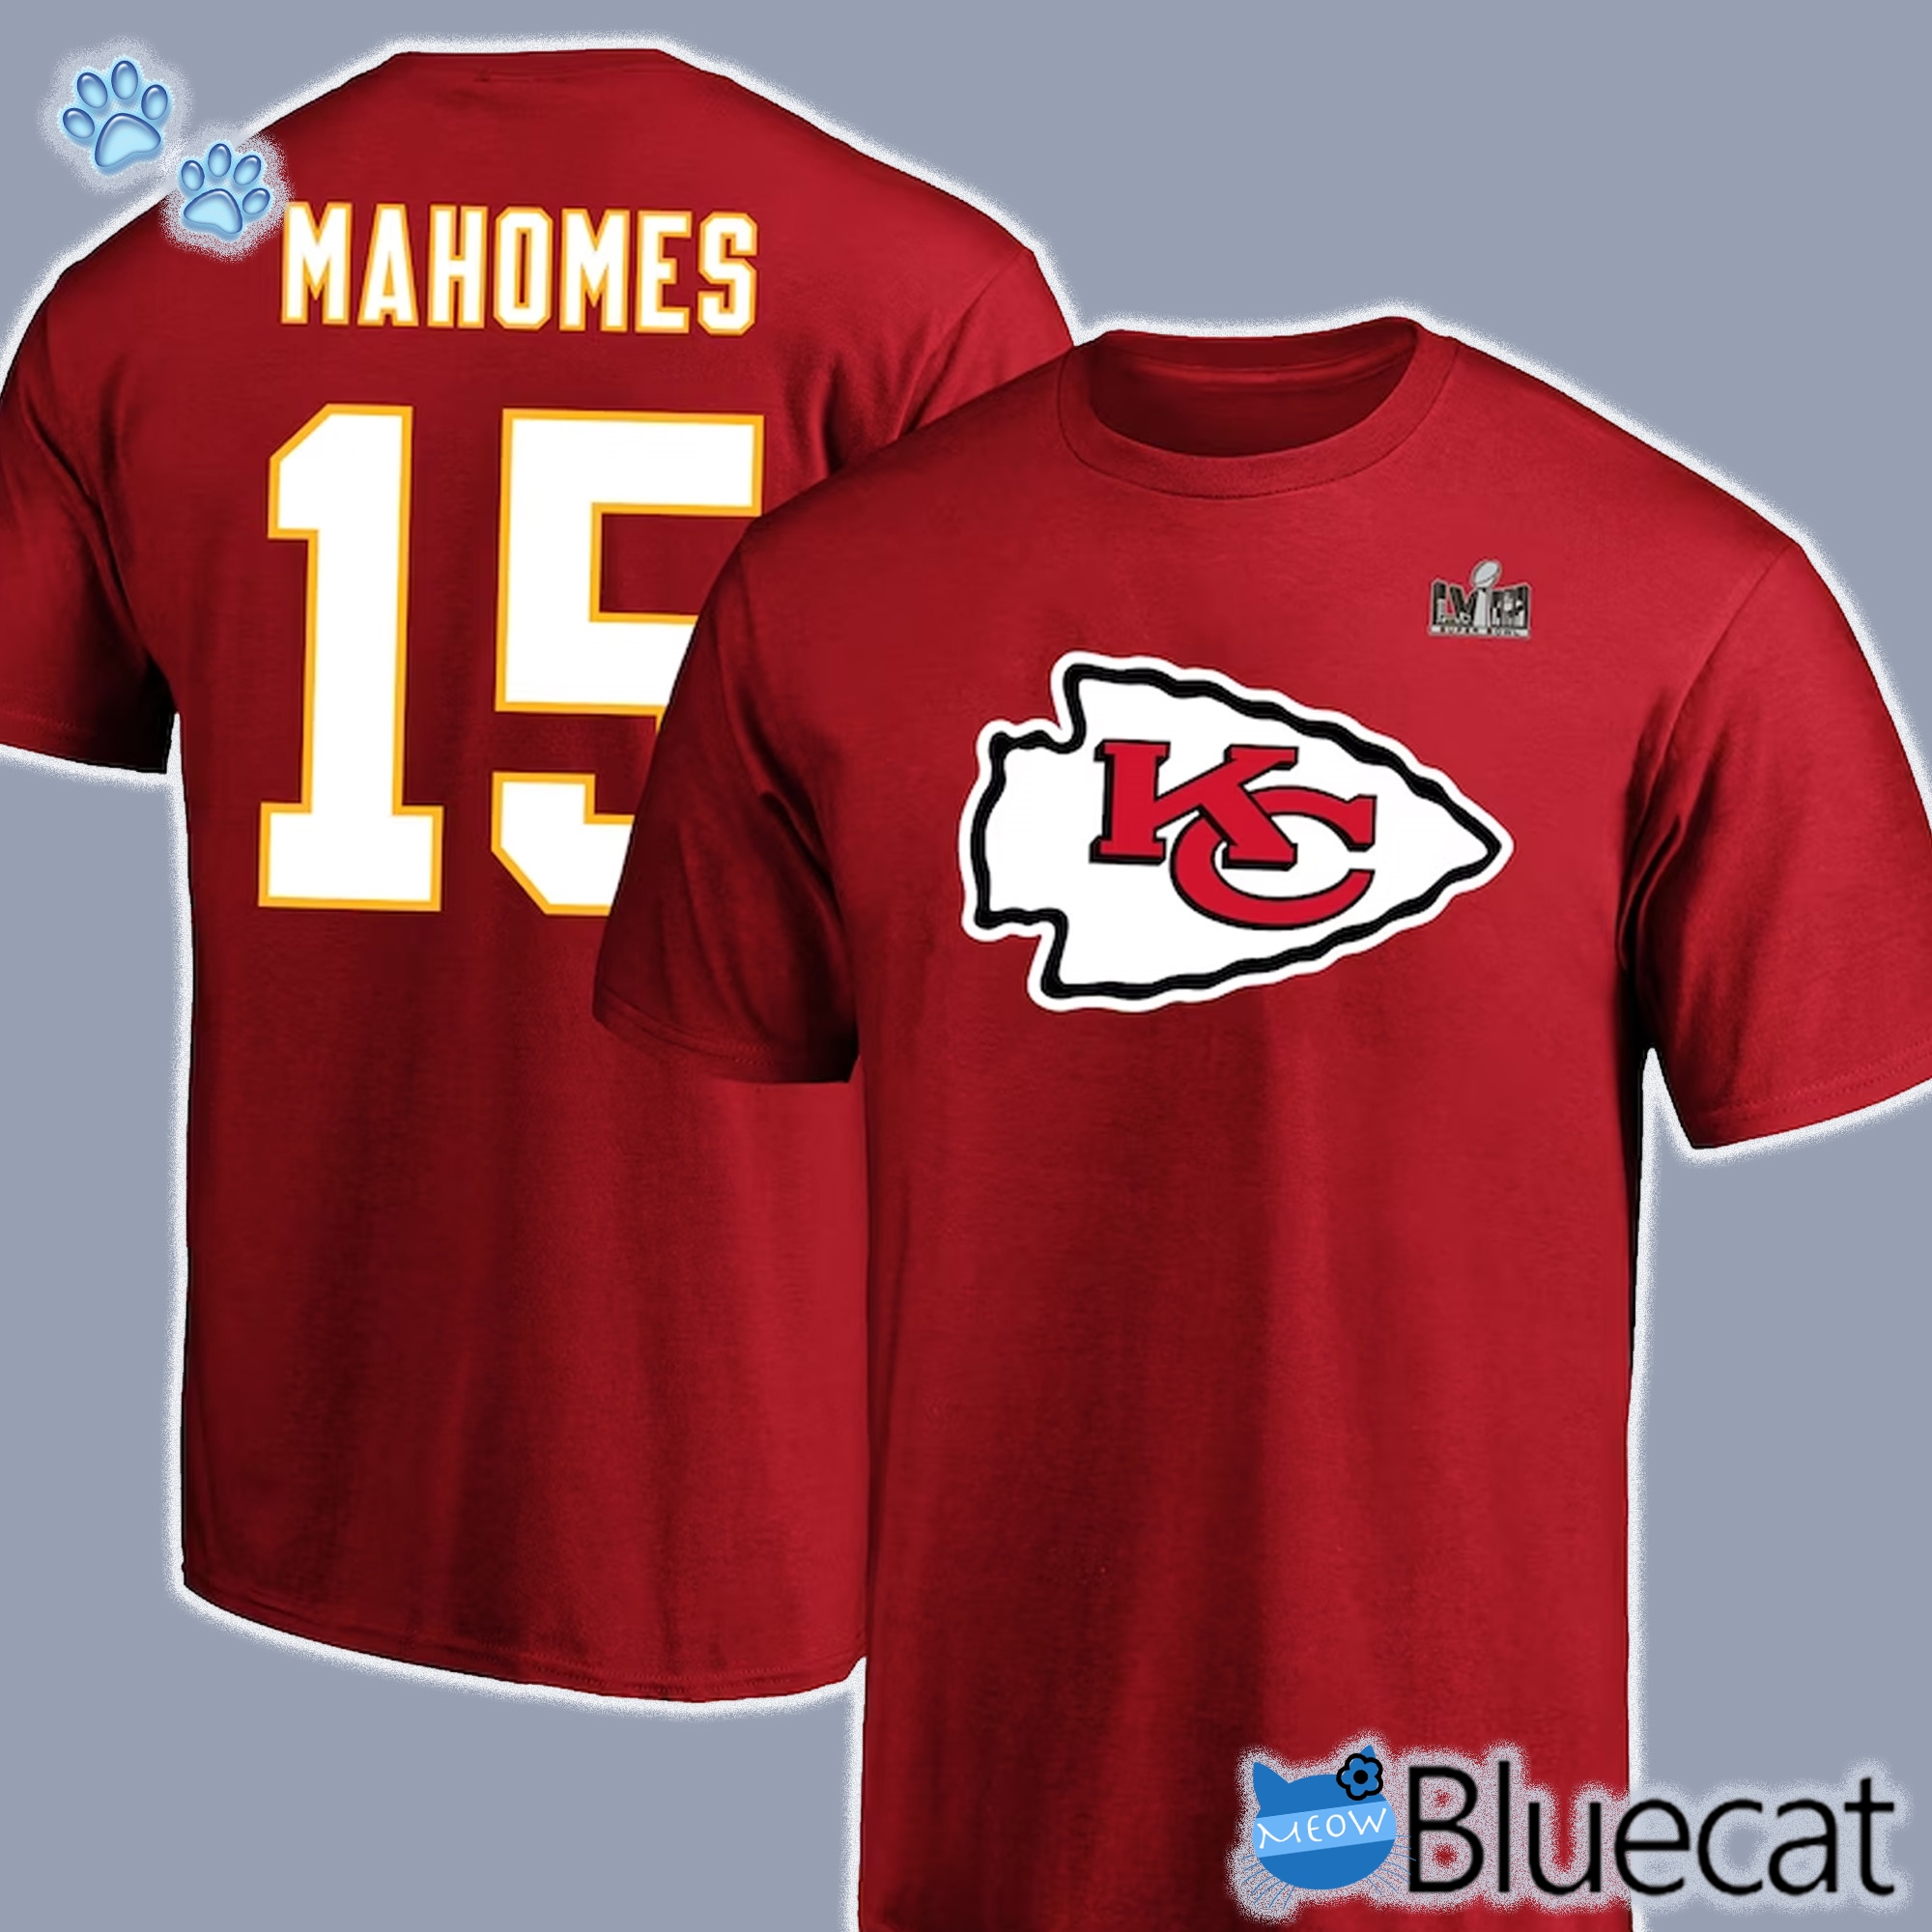 Kansas Patrick Branded - Big Chiefs Fanatics And Lviii Number Official City And Tall Bowl Super Name Mahomes Player Bluecat T-shirt